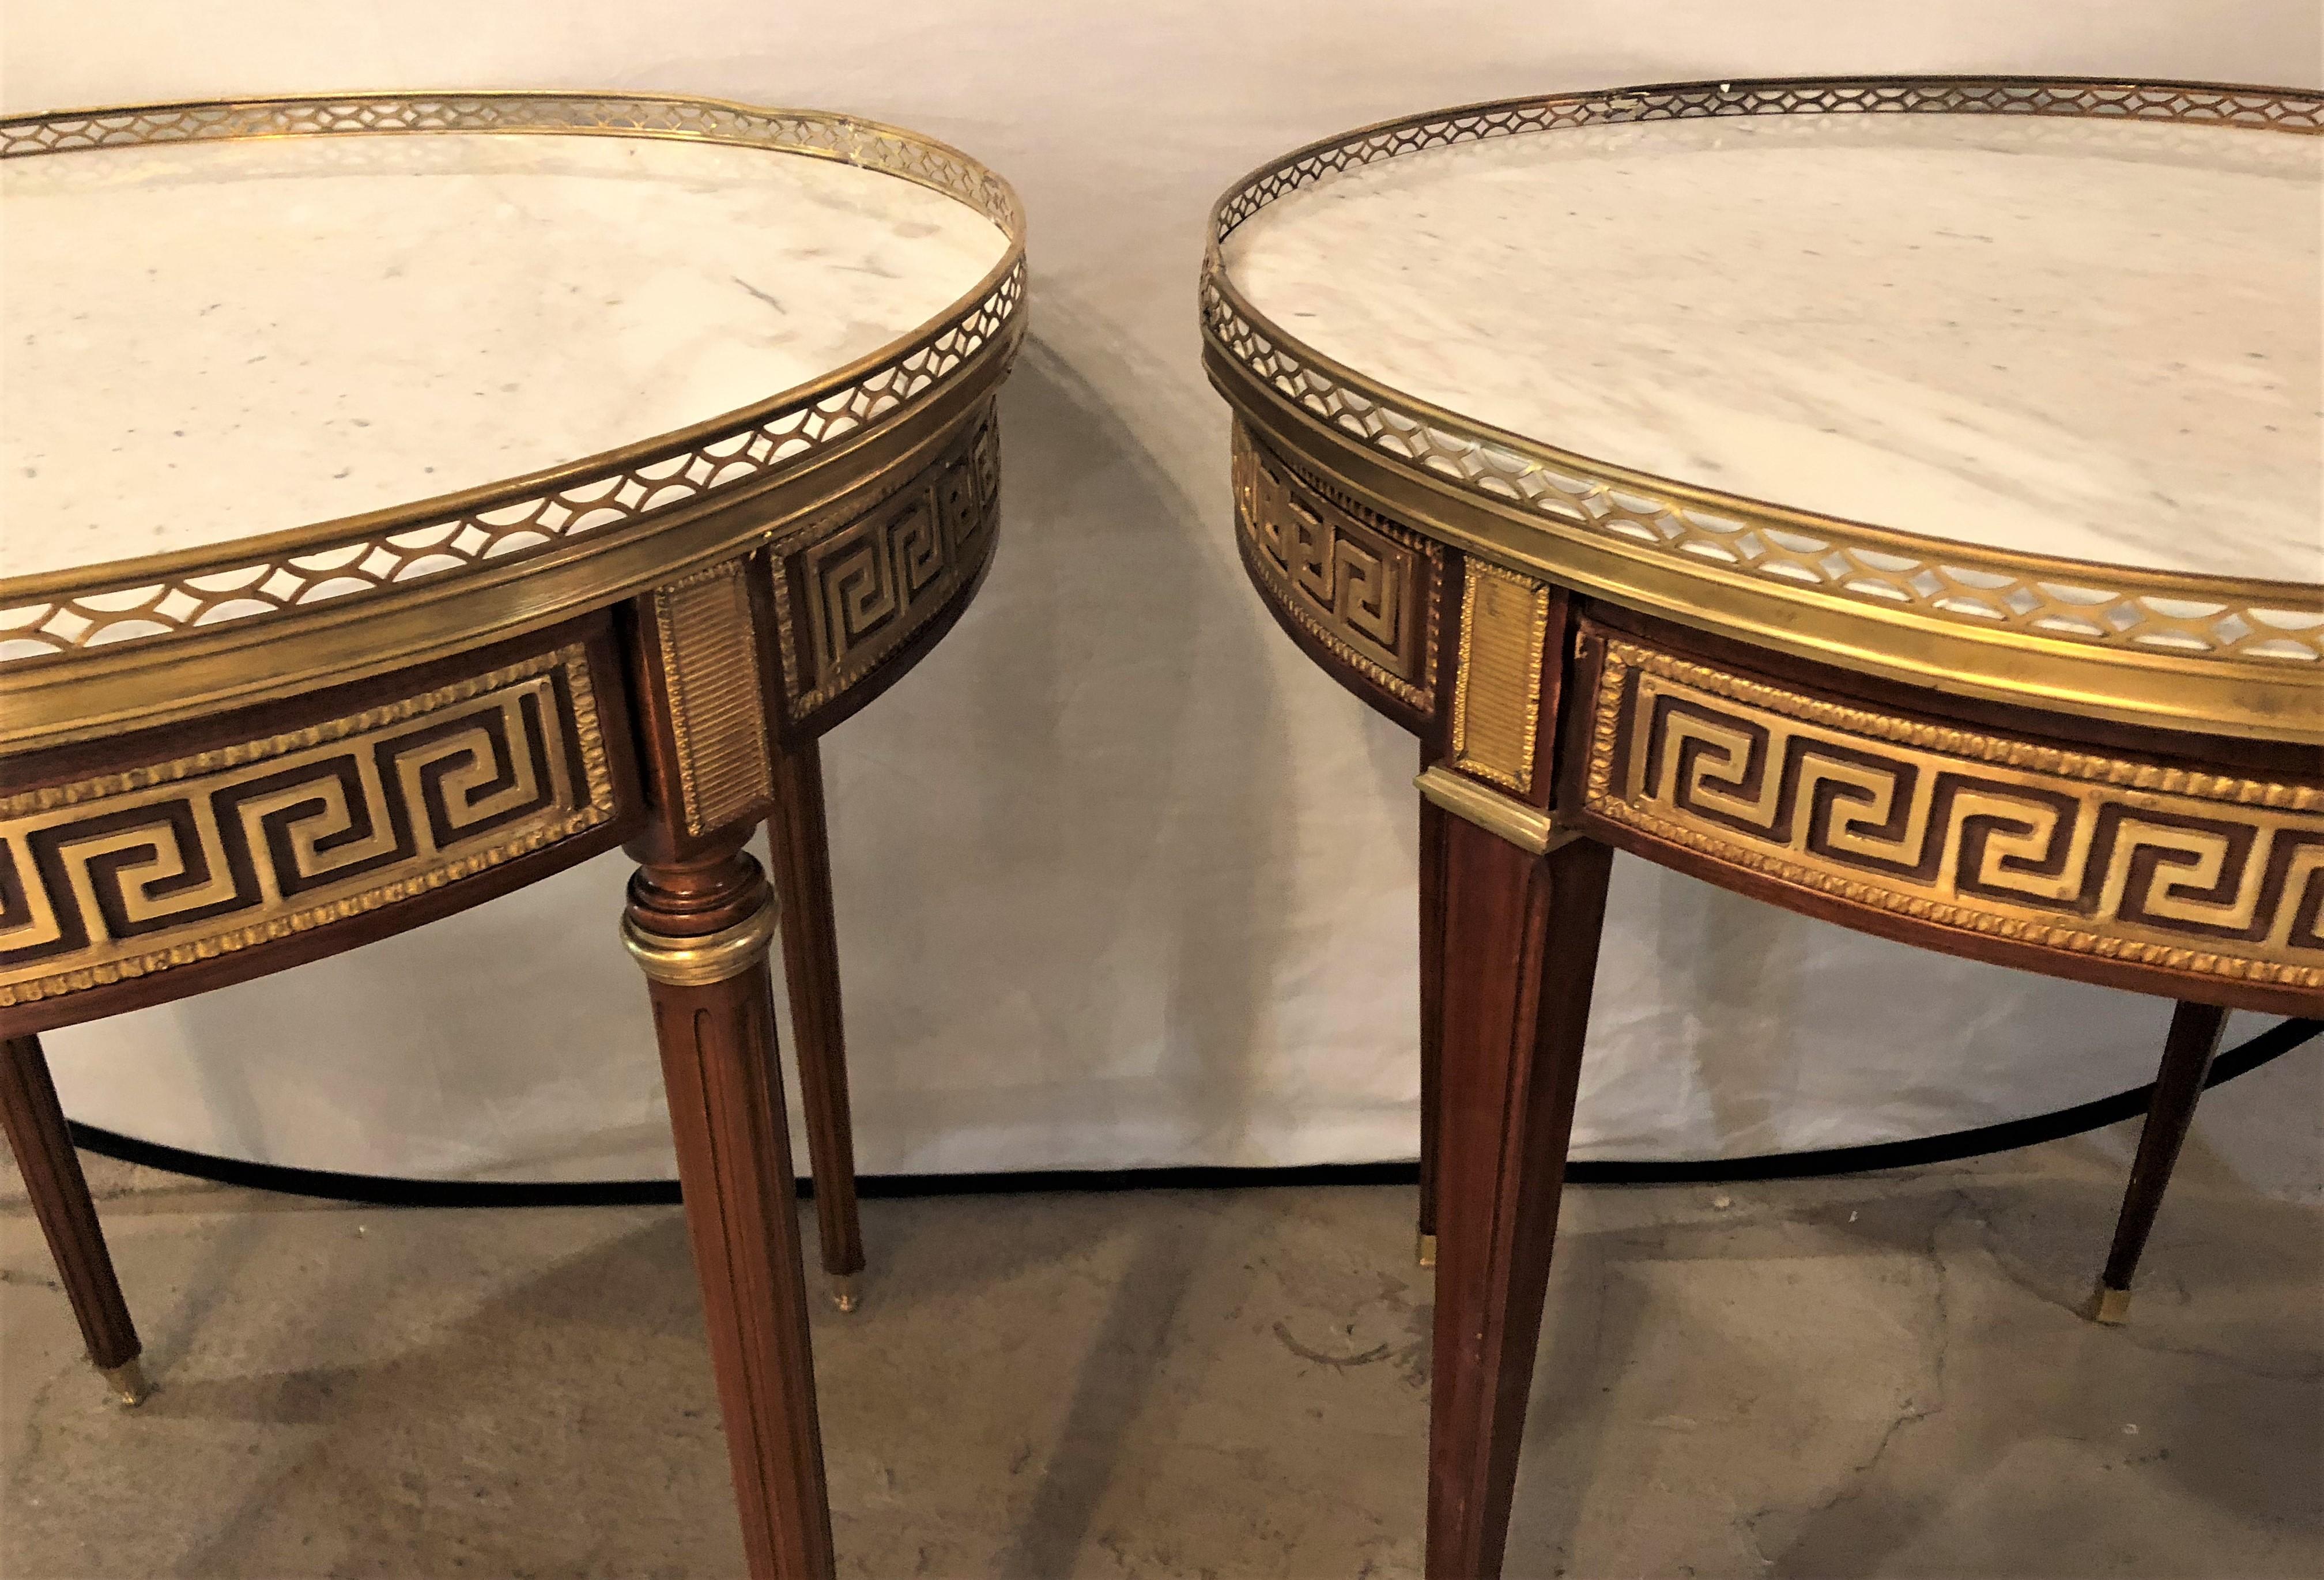 European Pair of Marble-Top Greek Key Bouiliotte Tables / End Mahogany Double Drawers